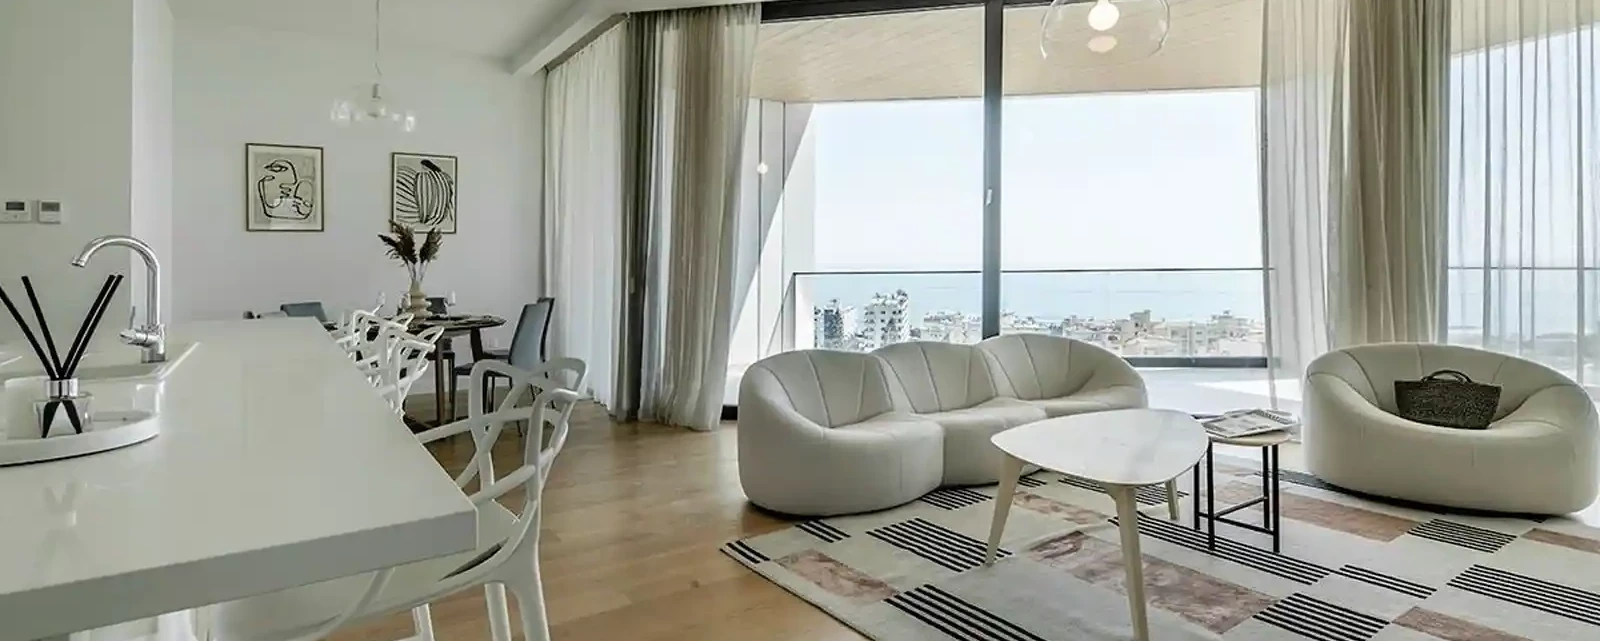 3-bedroom apartment to rent €9.500, image 1